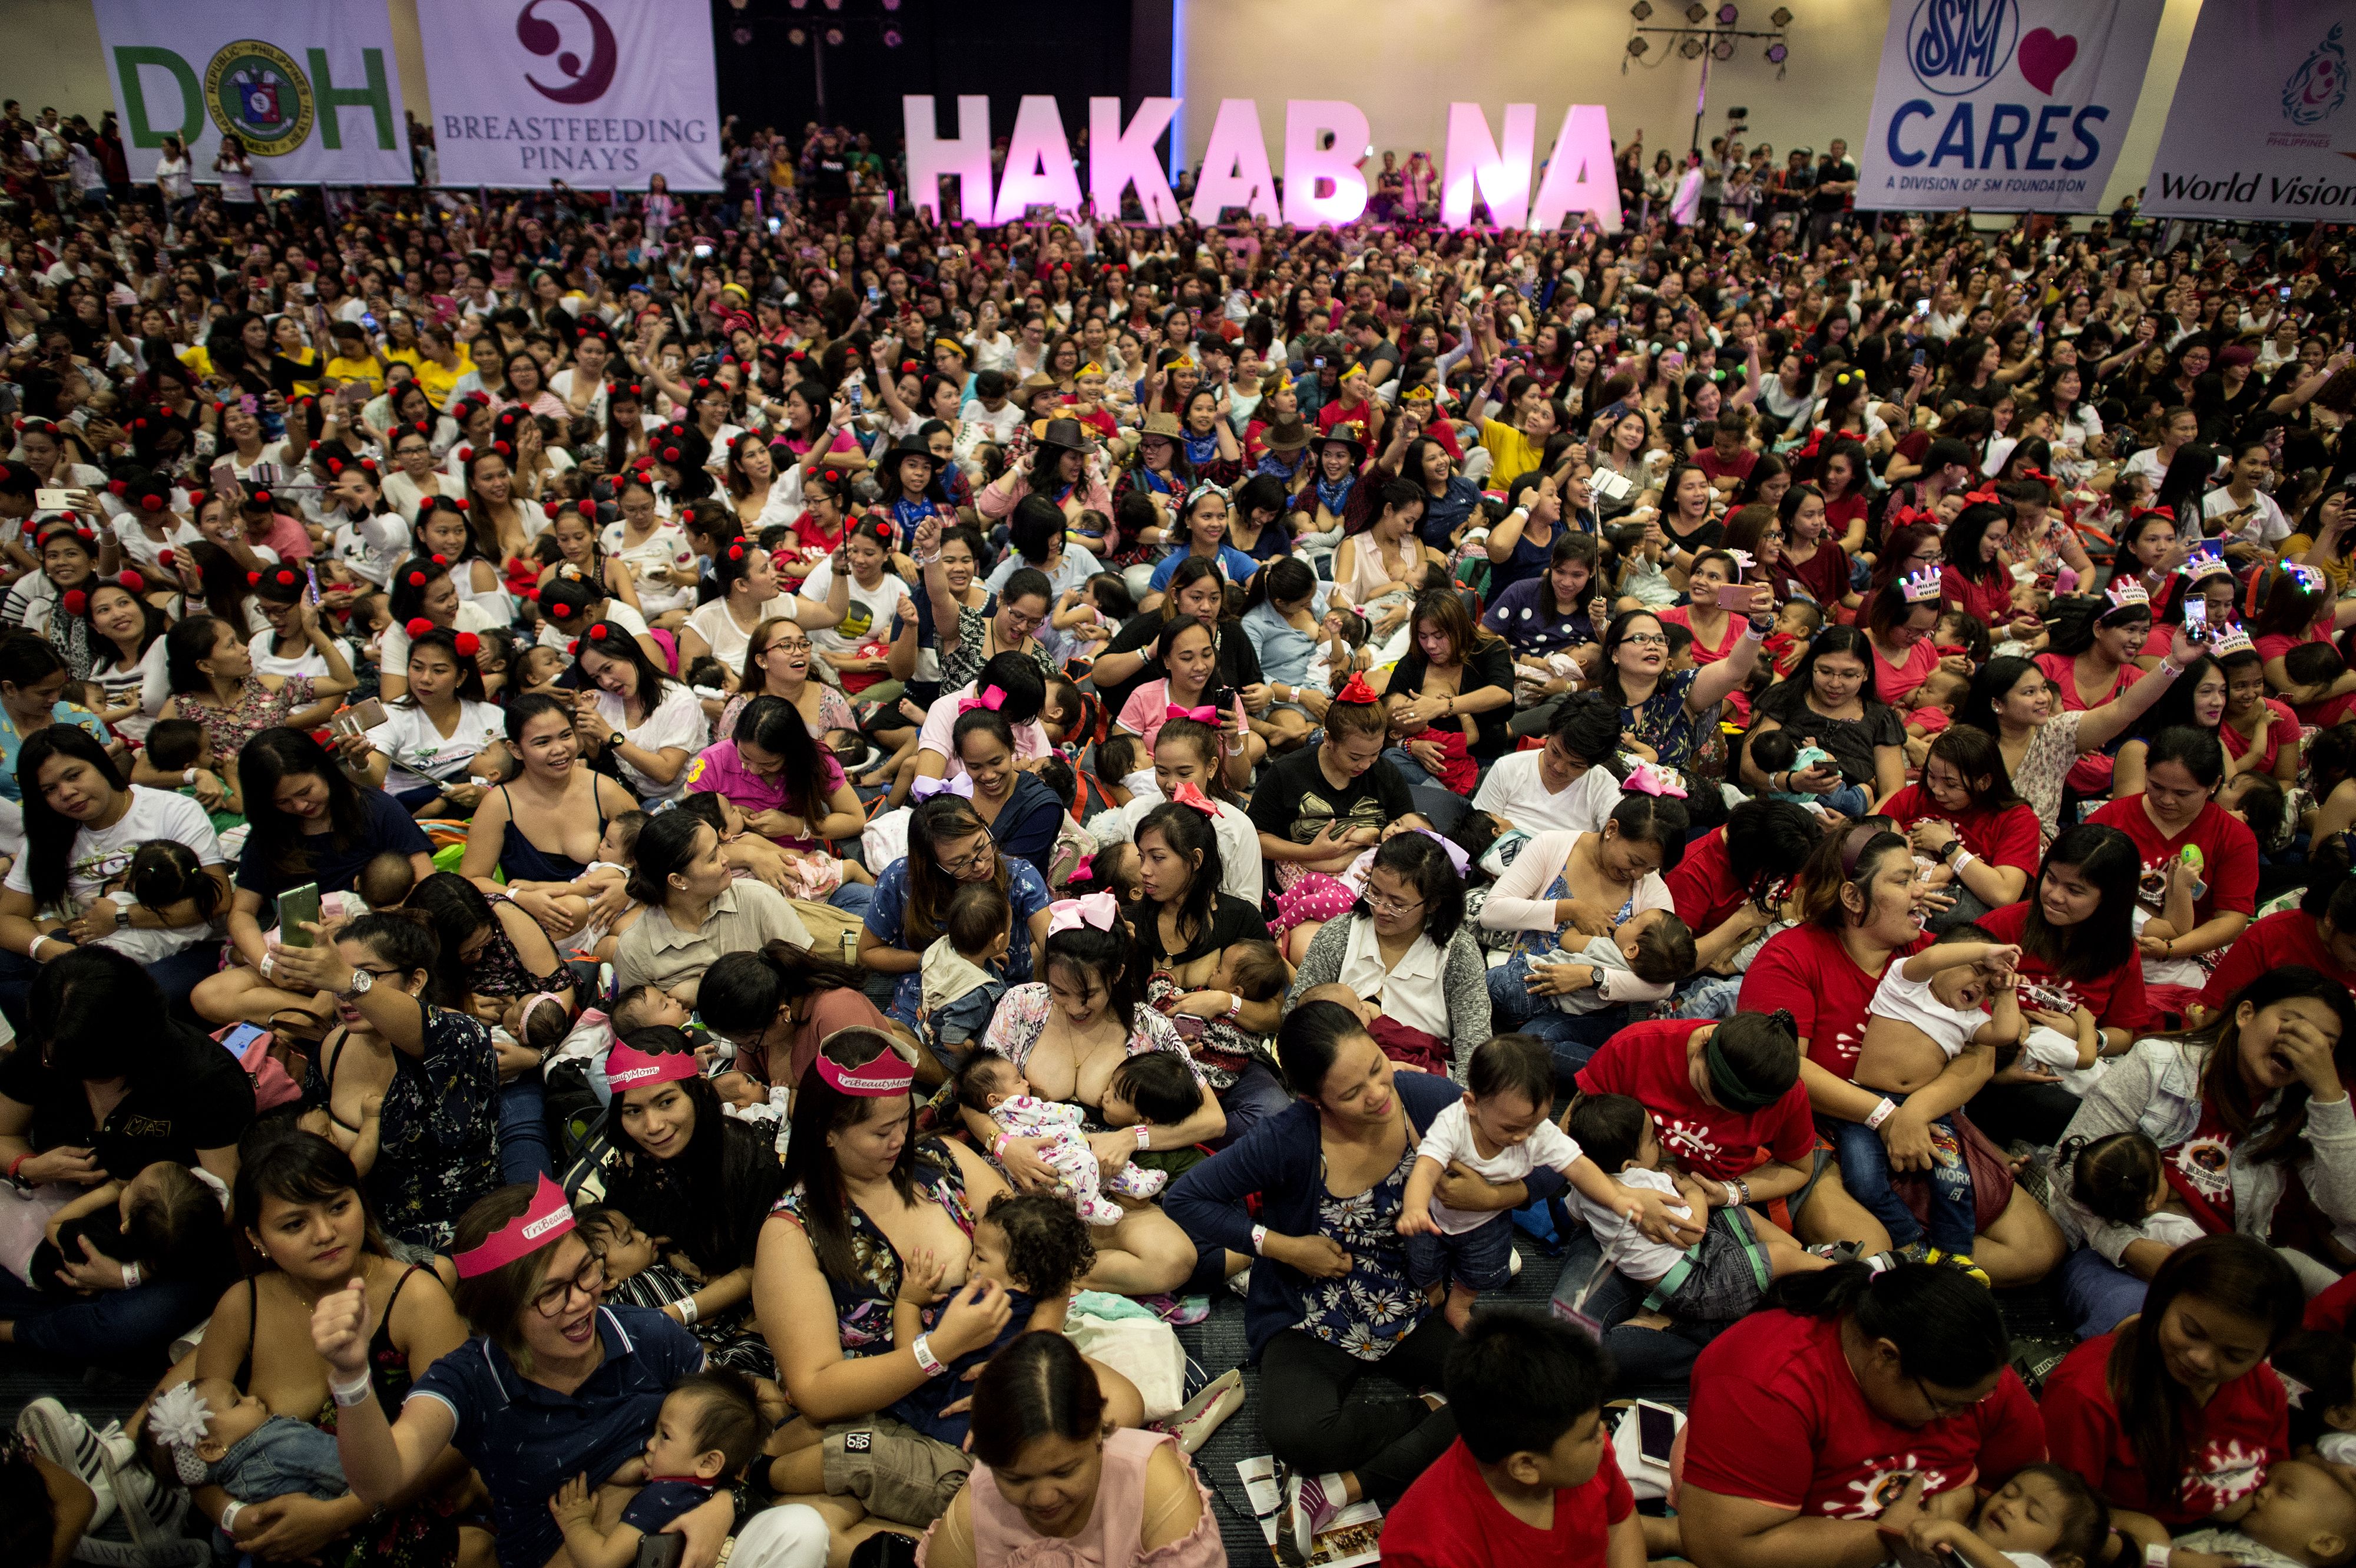 Mothers participate in a breastfeeding event in Manila on Aug. 5, 2018. (Noel Celis&mdash;AFP/Getty Images)